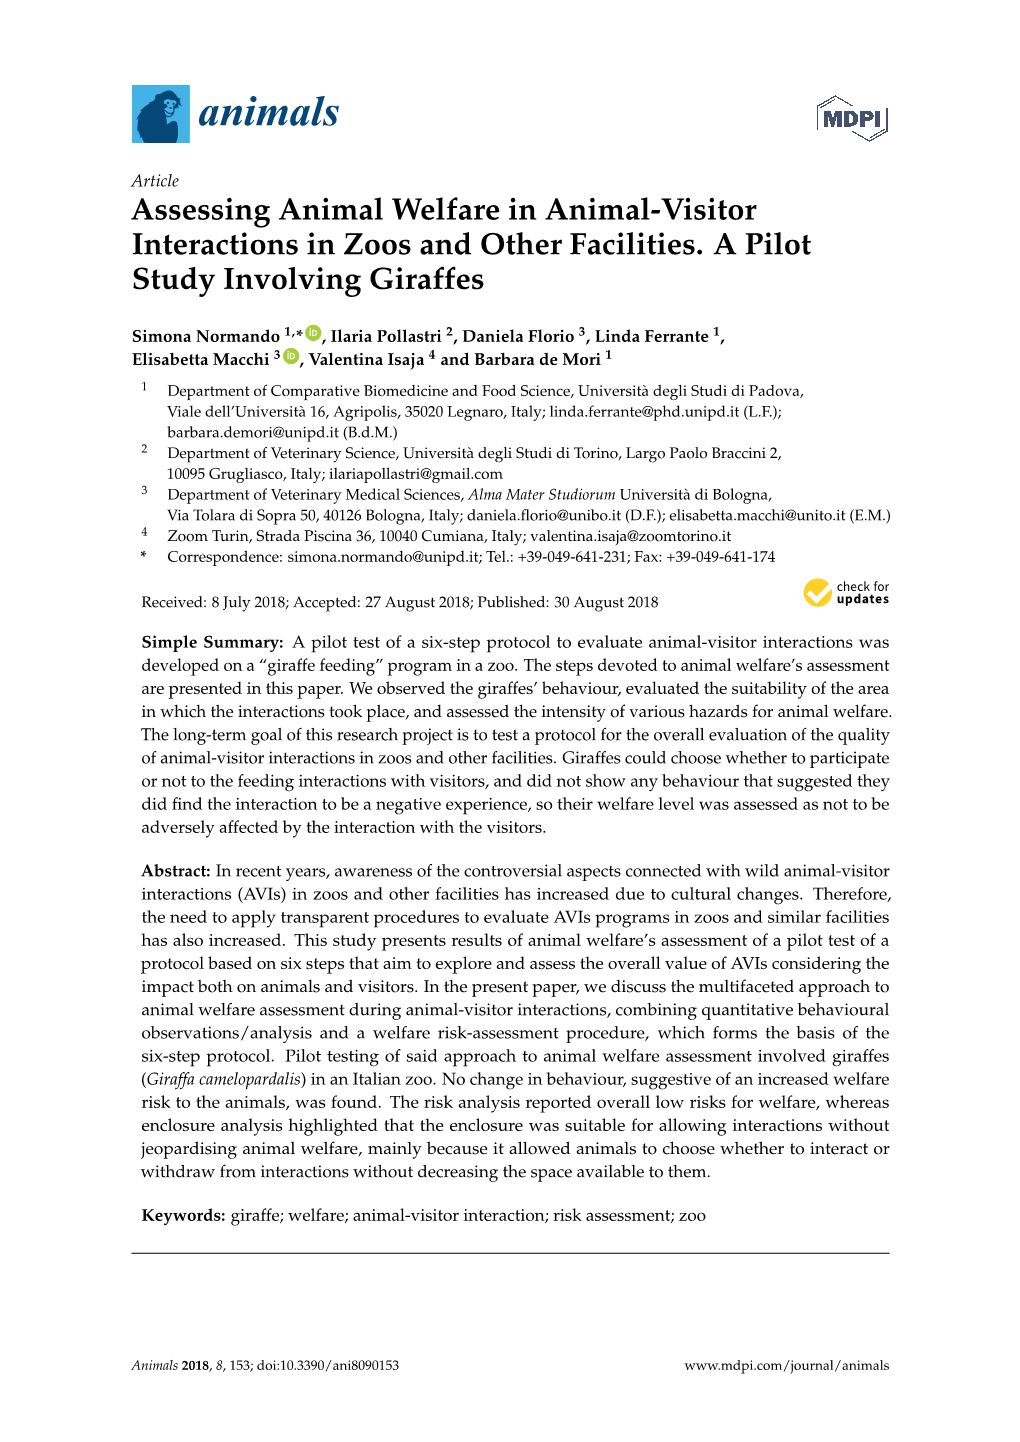 Assessing Animal Welfare in Animal-Visitor Interactions in Zoos and Other Facilities. a Pilot Study Involving Giraffes